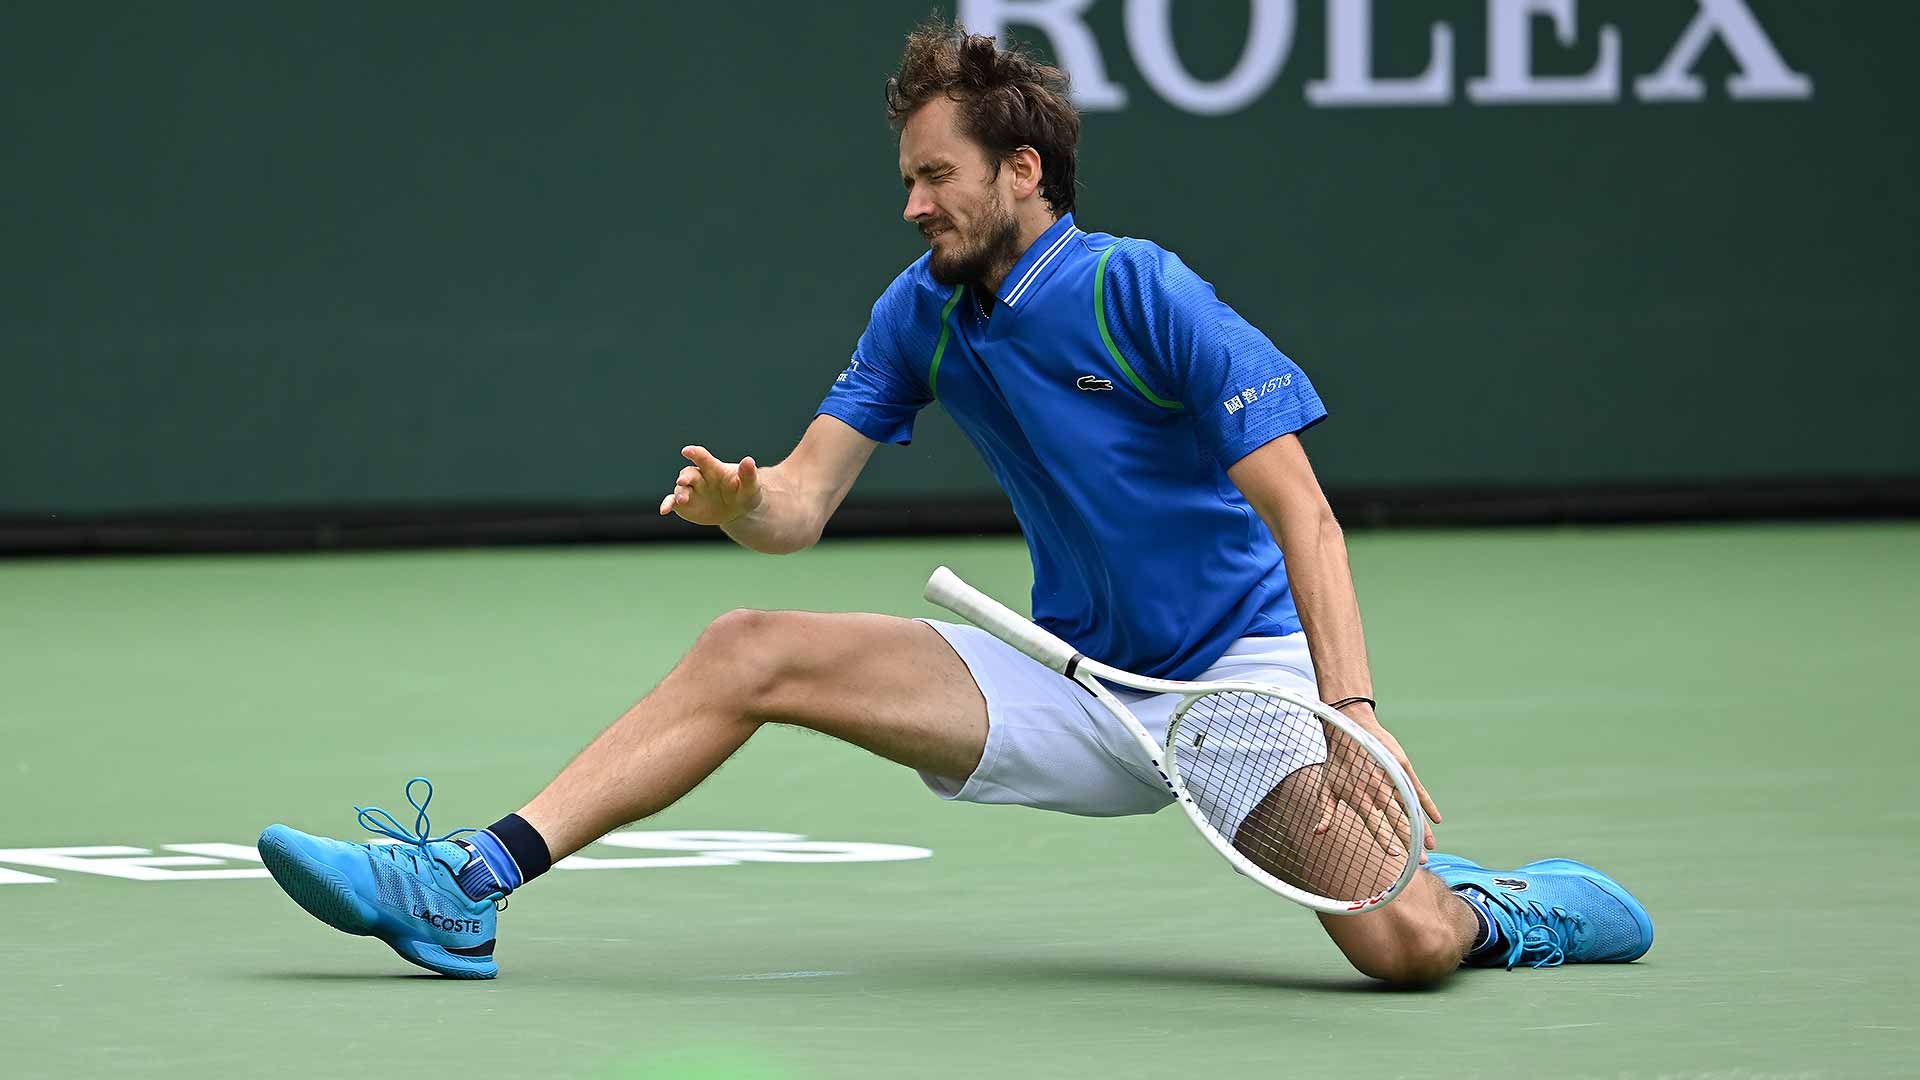 <a href='https://www.atptour.com/en/players/daniil-medvedev/mm58/overview'>Daniil Medvedev</a> takes a tumble during his three-set win over <a href='https://www.atptour.com/en/players/alexander-zverev/z355/overview'>Alexander Zverev</a>.